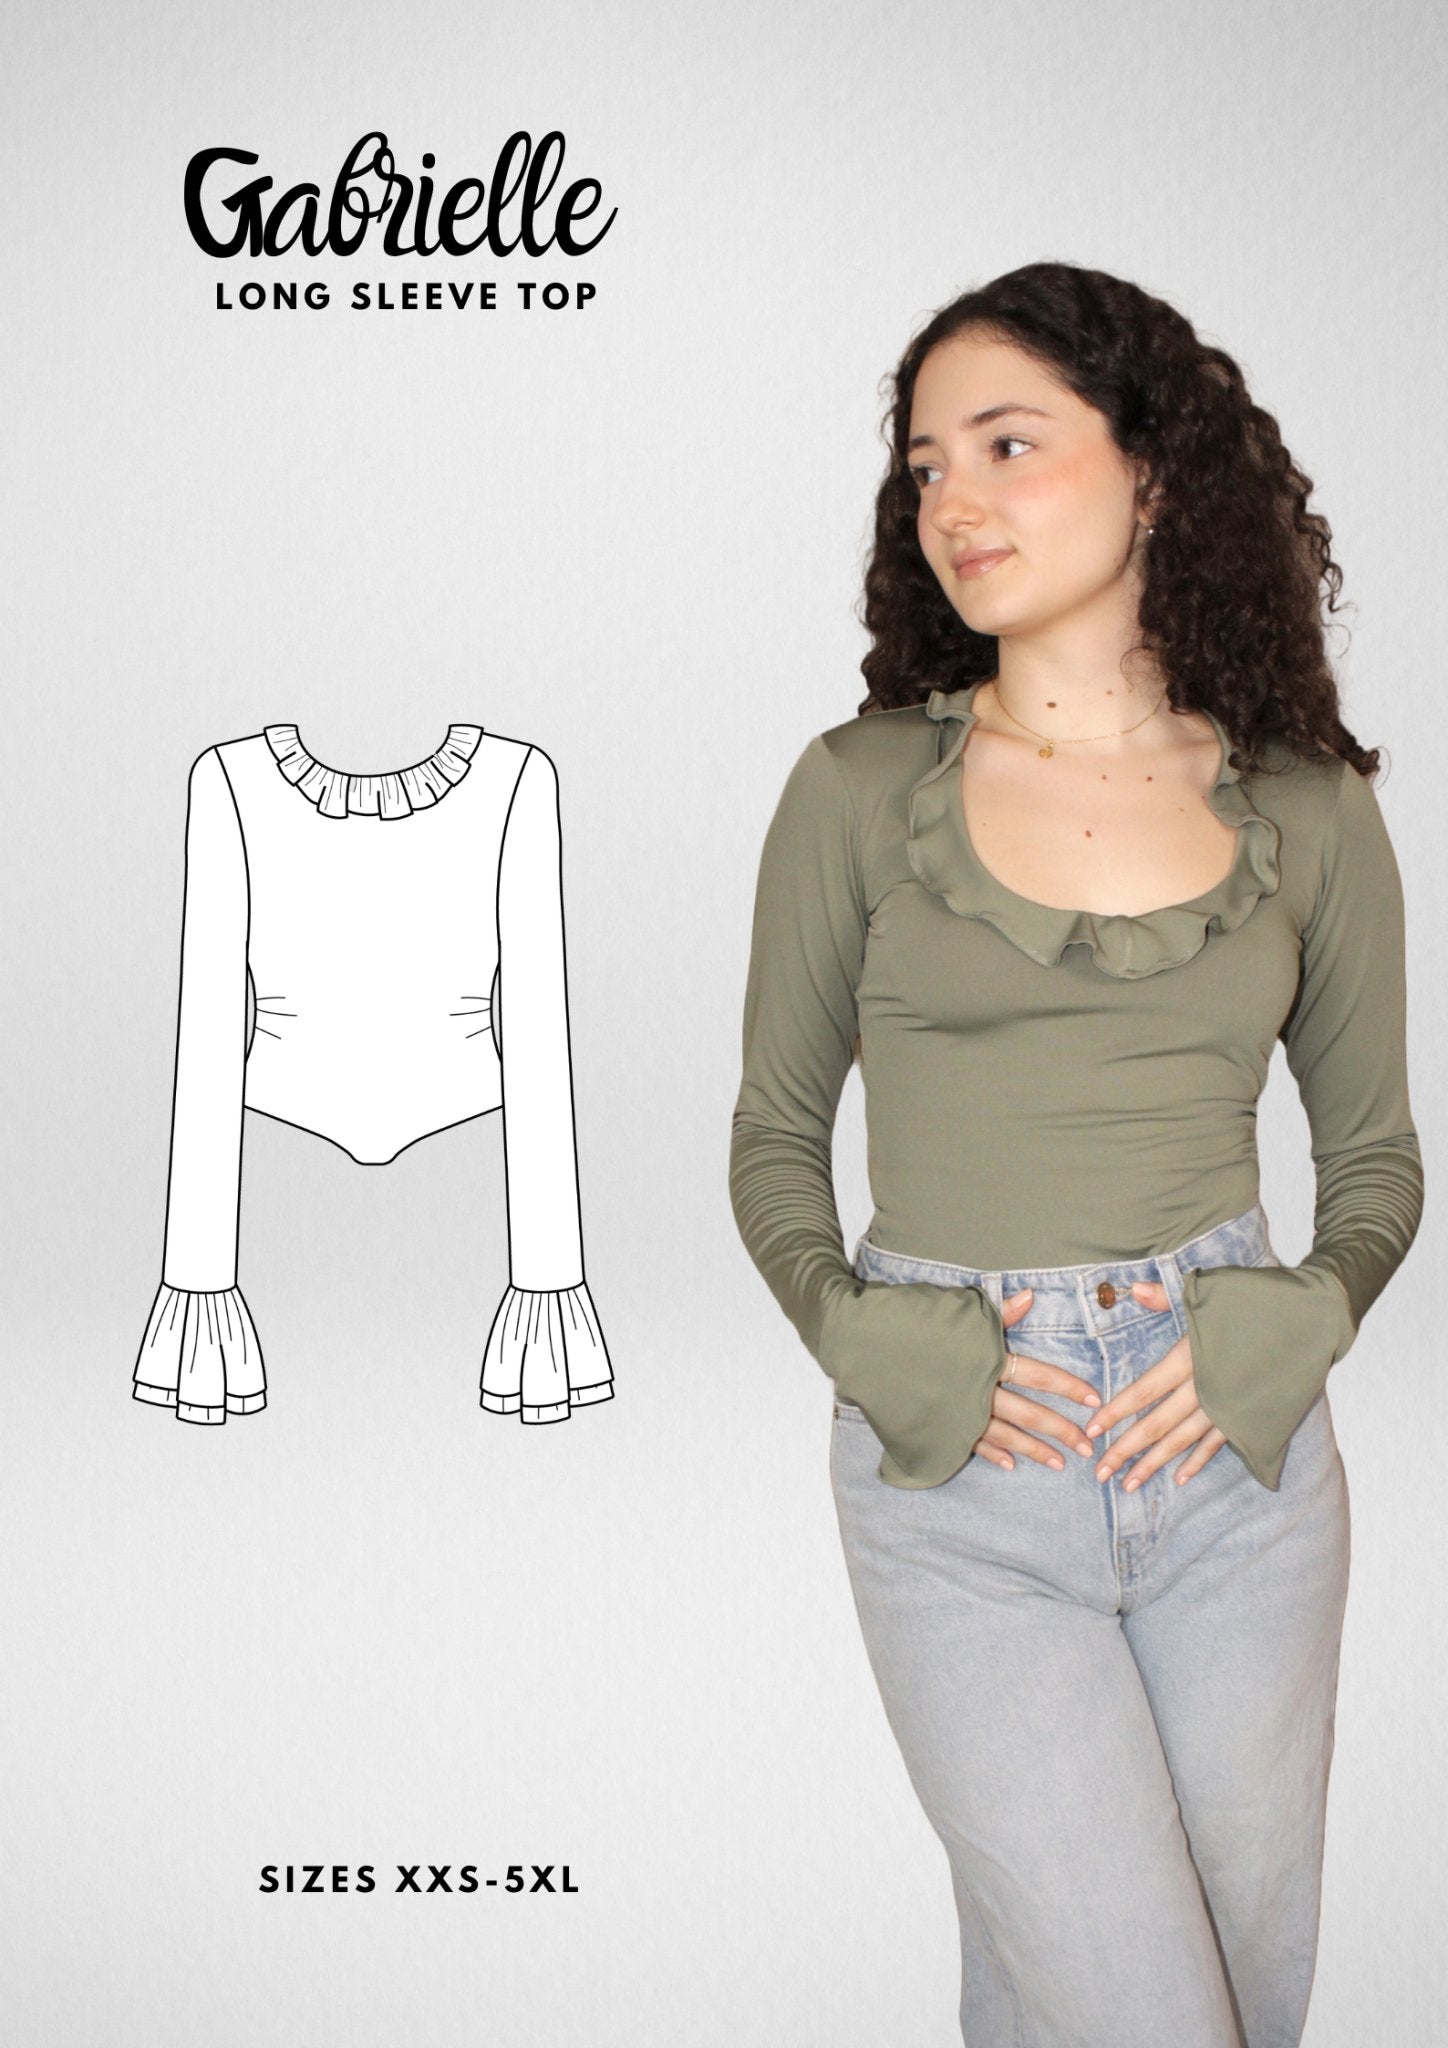 Tight-Fit Ruffled Top [Sewing Pattern - Gabrielle Top] - Friedlies